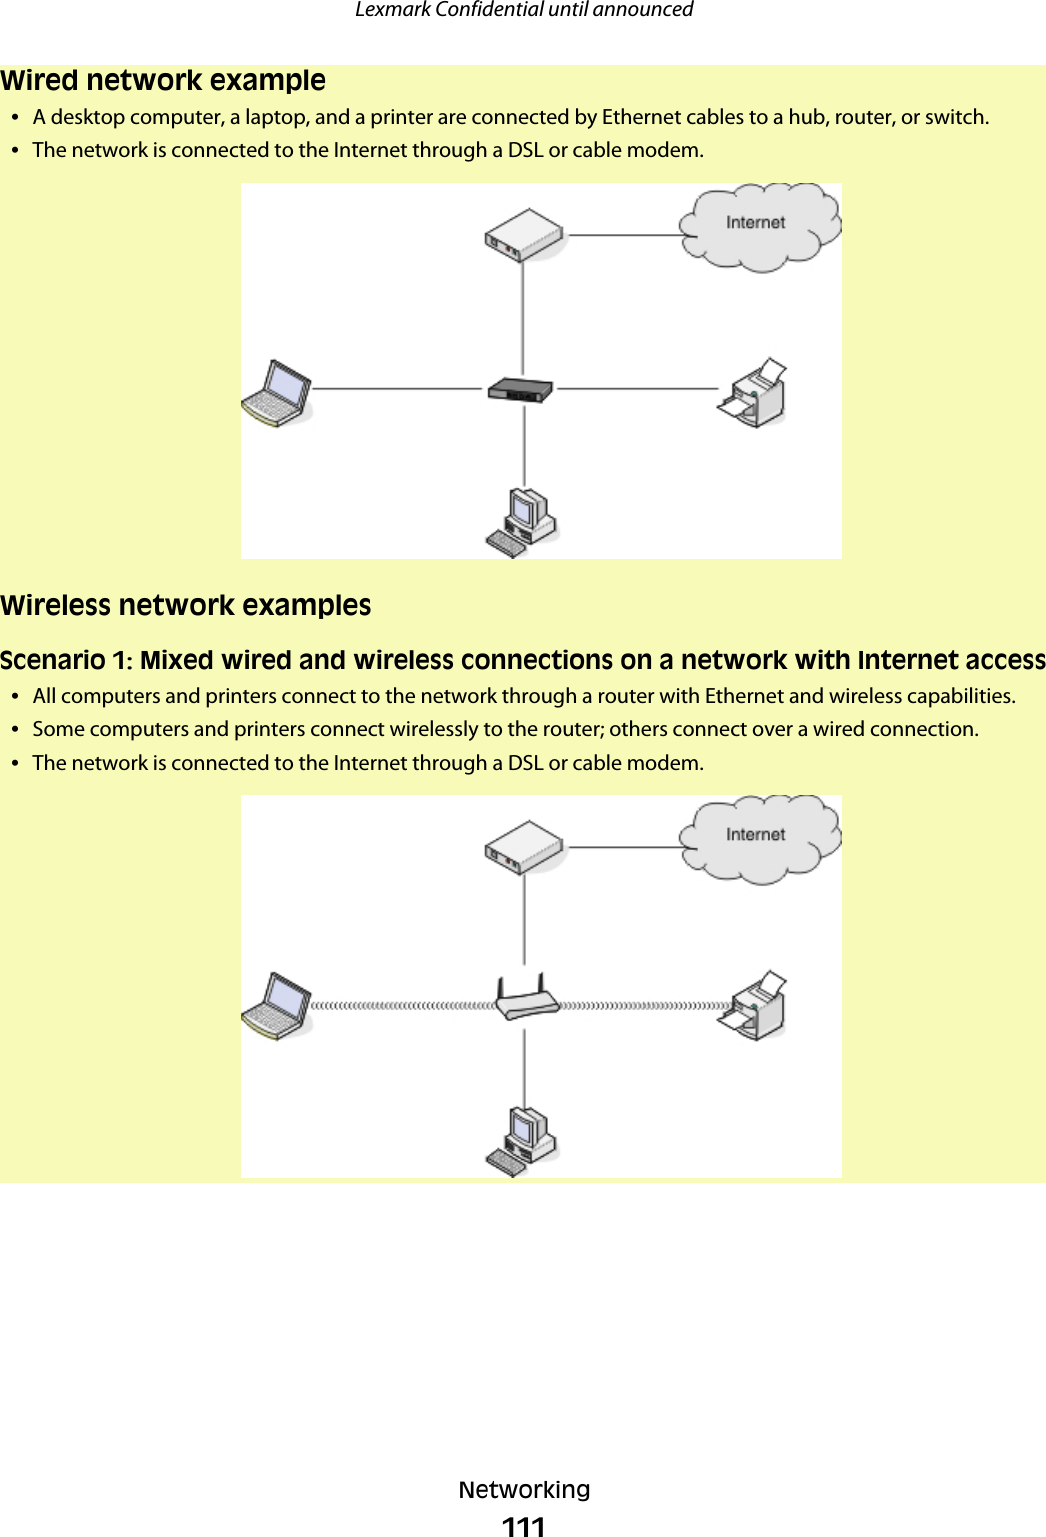 Wired network example•A desktop computer, a laptop, and a printer are connected by Ethernet cables to a hub, router, or switch.•The network is connected to the Internet through a DSL or cable modem.Wireless network examplesScenario 1: Mixed wired and wireless connections on a network with Internet access•All computers and printers connect to the network through a router with Ethernet and wireless capabilities.•Some computers and printers connect wirelessly to the router; others connect over a wired connection.•The network is connected to the Internet through a DSL or cable modem.Lexmark Confidential until announcedNetworking111